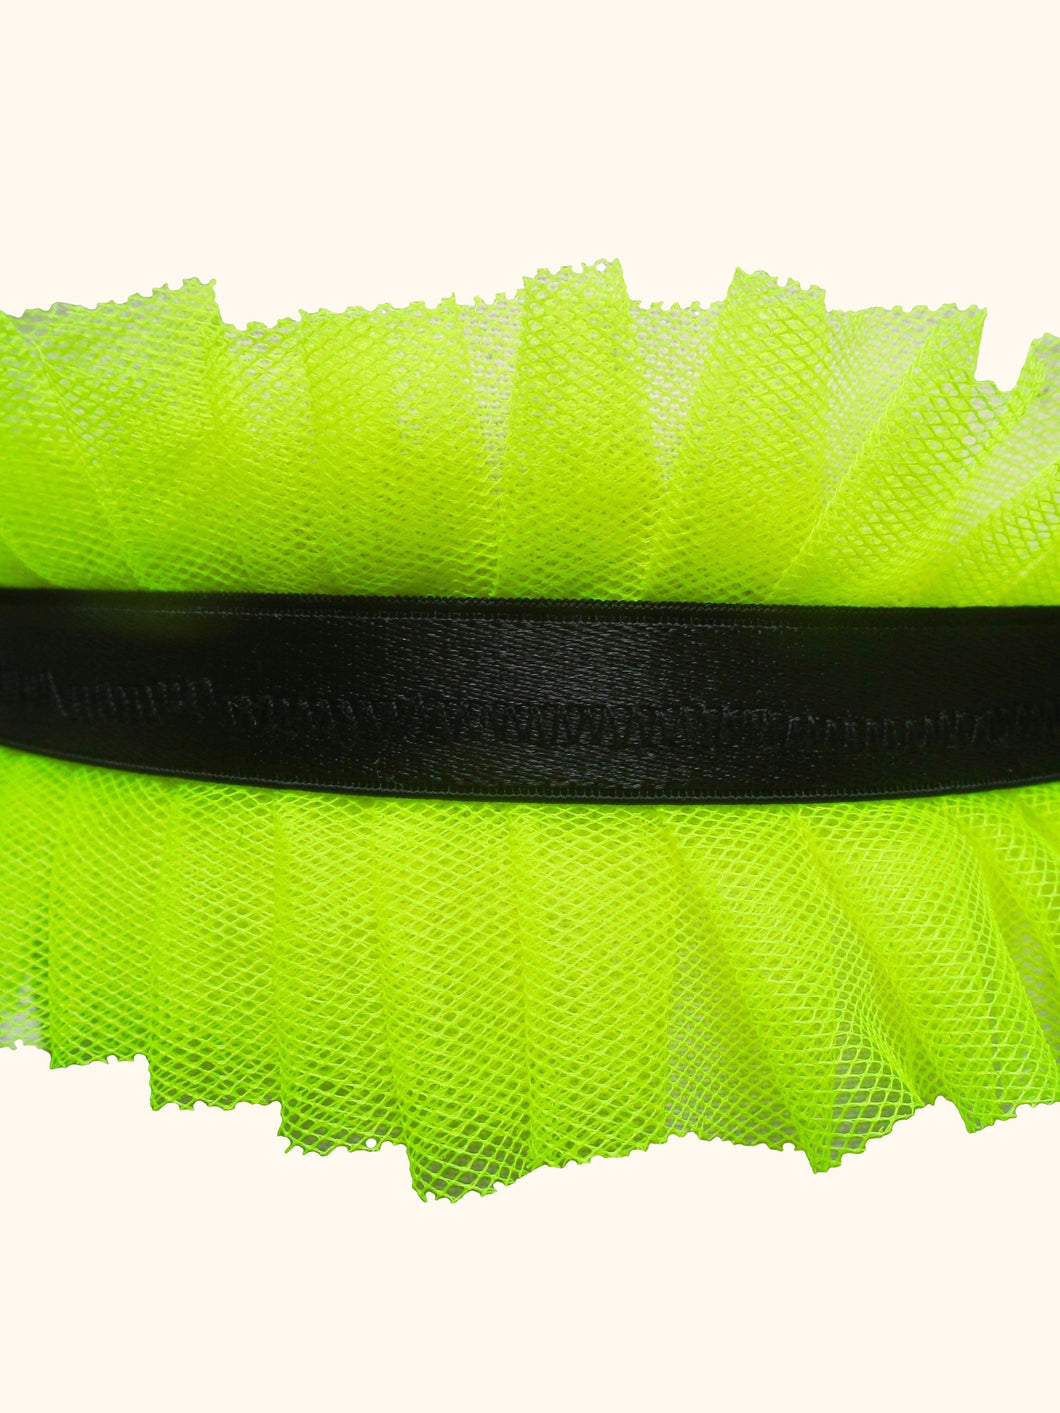 A close up of a garter with a central black satin elastic band. Either side of the band are neon yellow pleated tulle frills.